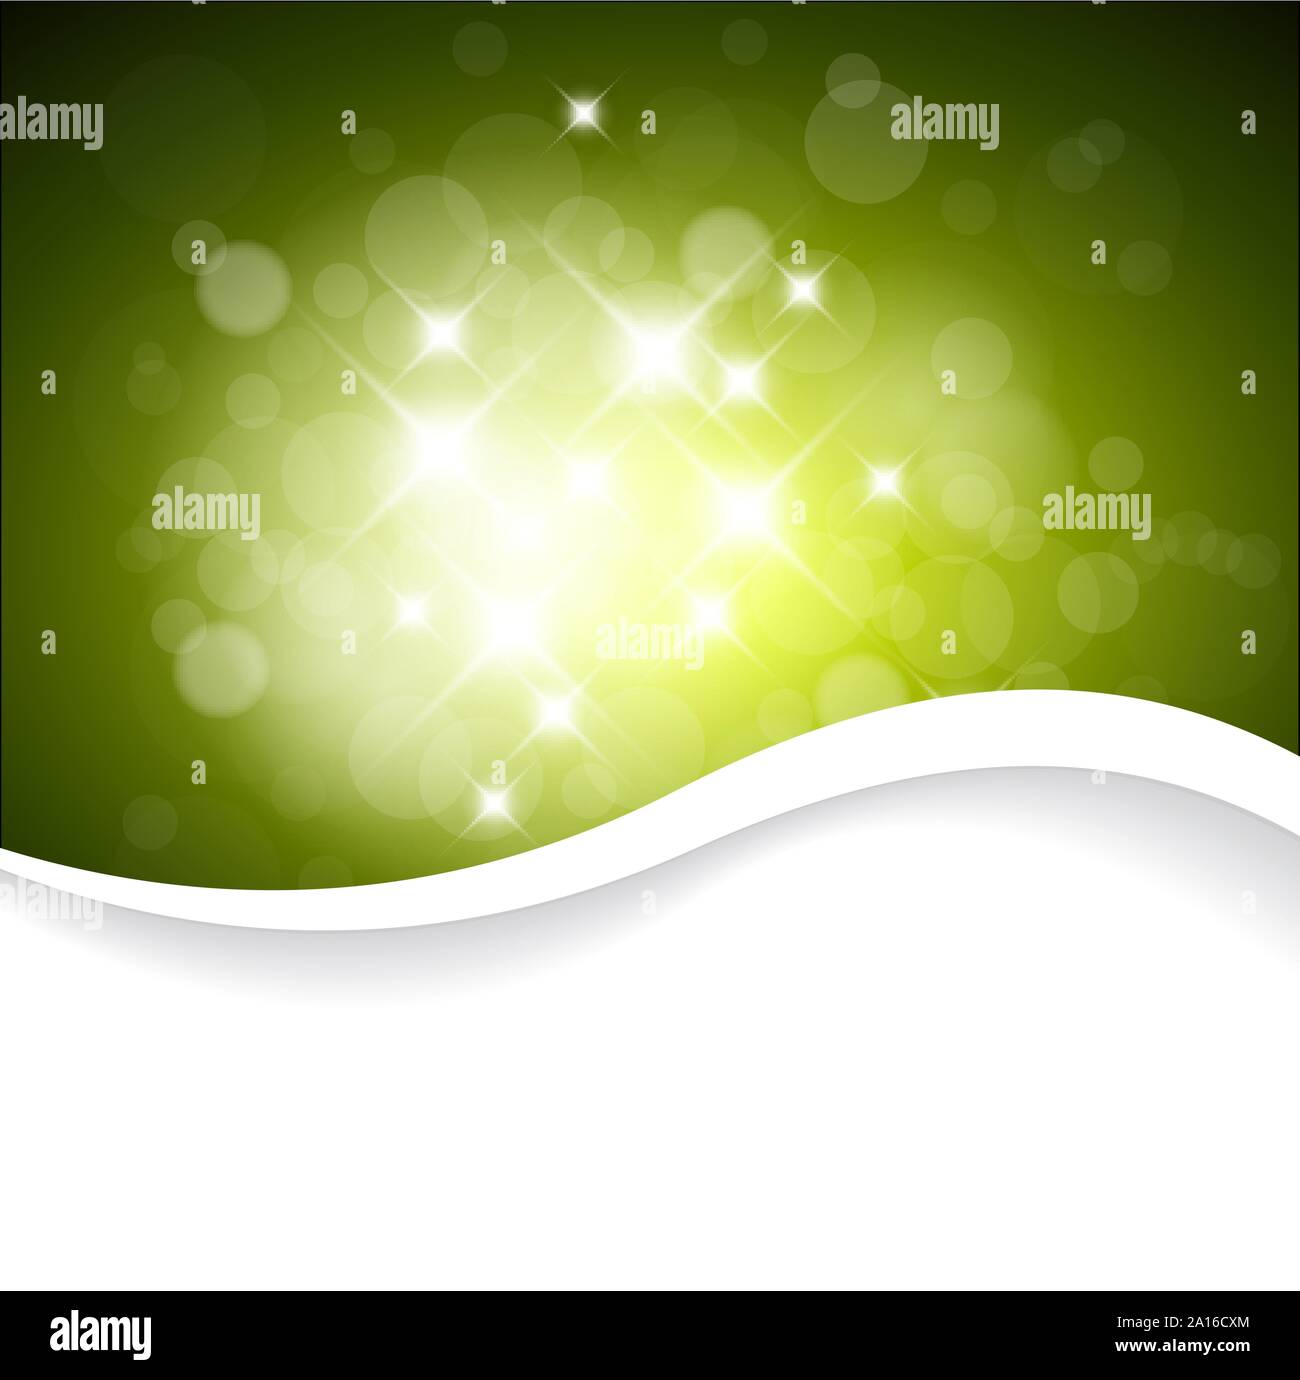 Vector Green background with white lights and place for your text Stock Vector